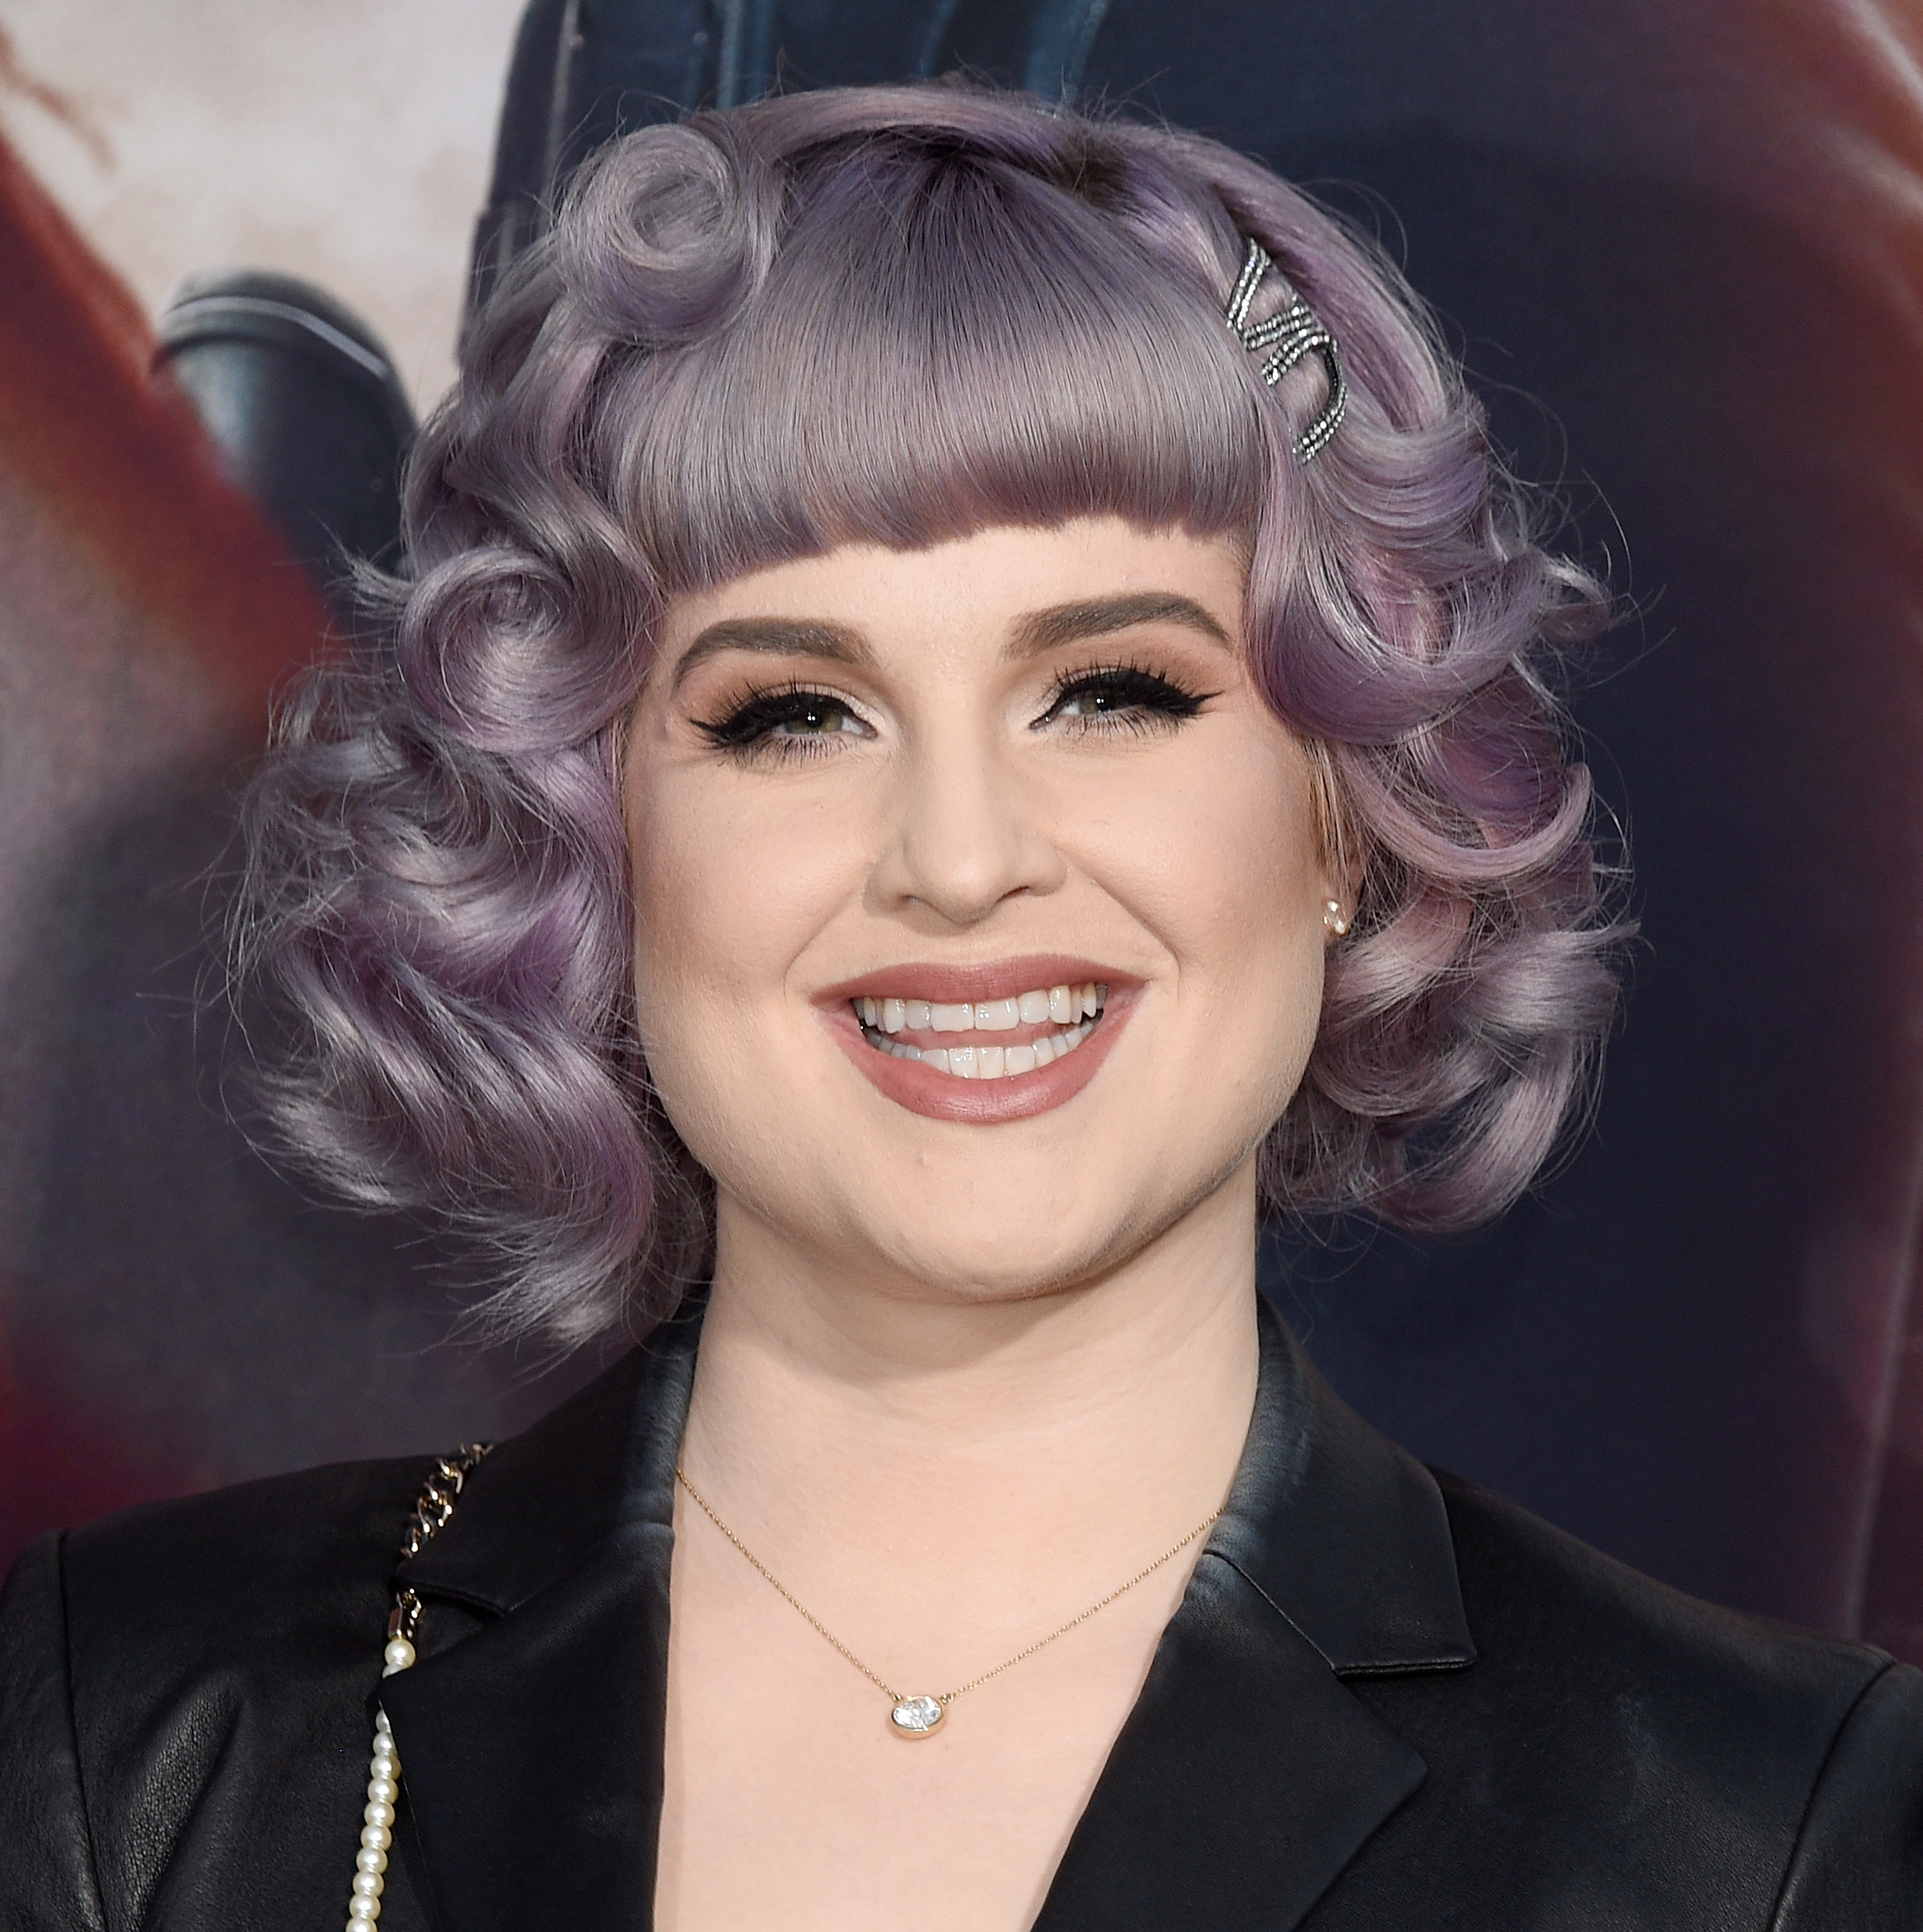 Kelly Osbourne at the premiere of "Angels Has Fallen" in Westwood, California on August 20, 2019 | Source: Getty Images